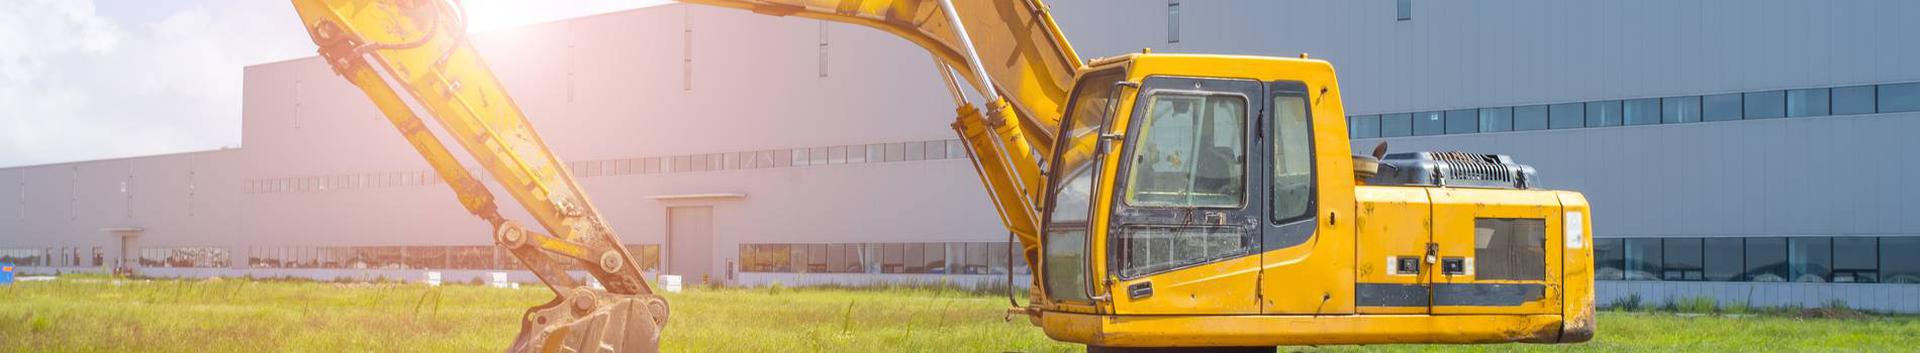 rental of construction machinery and tools and other related services, products, consultations